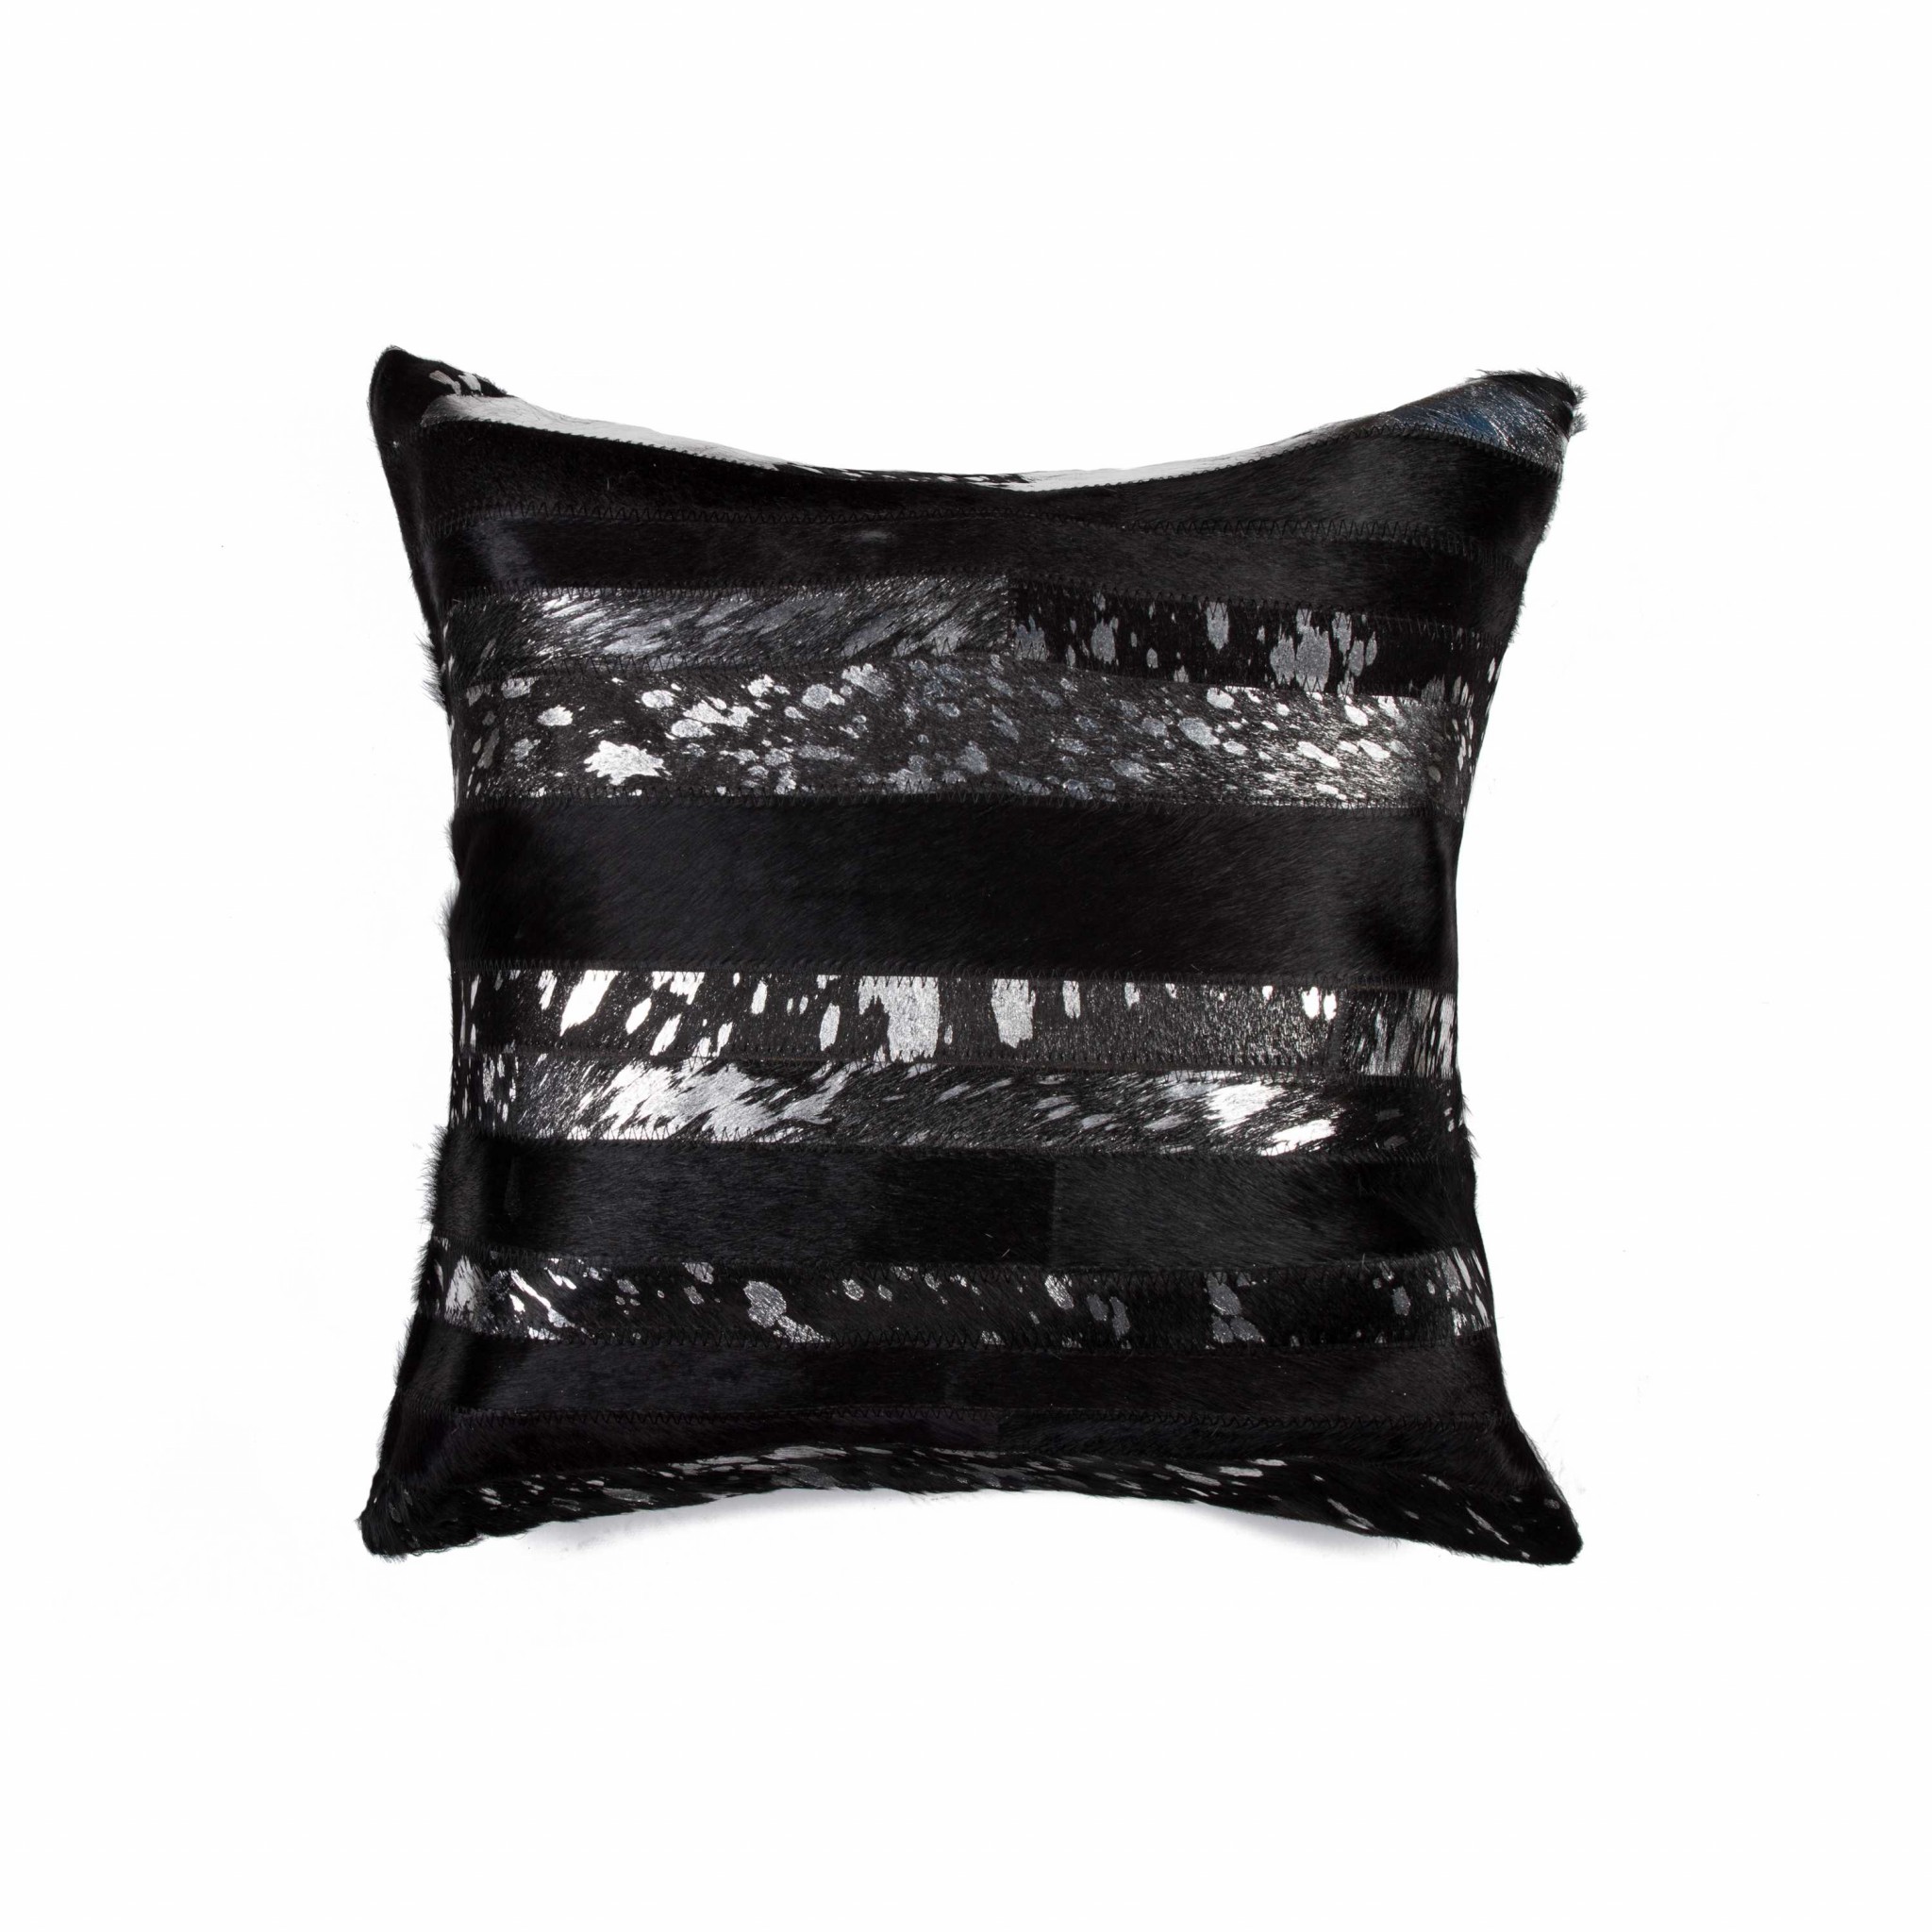 18" x 18" x 5" Black And Silver - Pillow